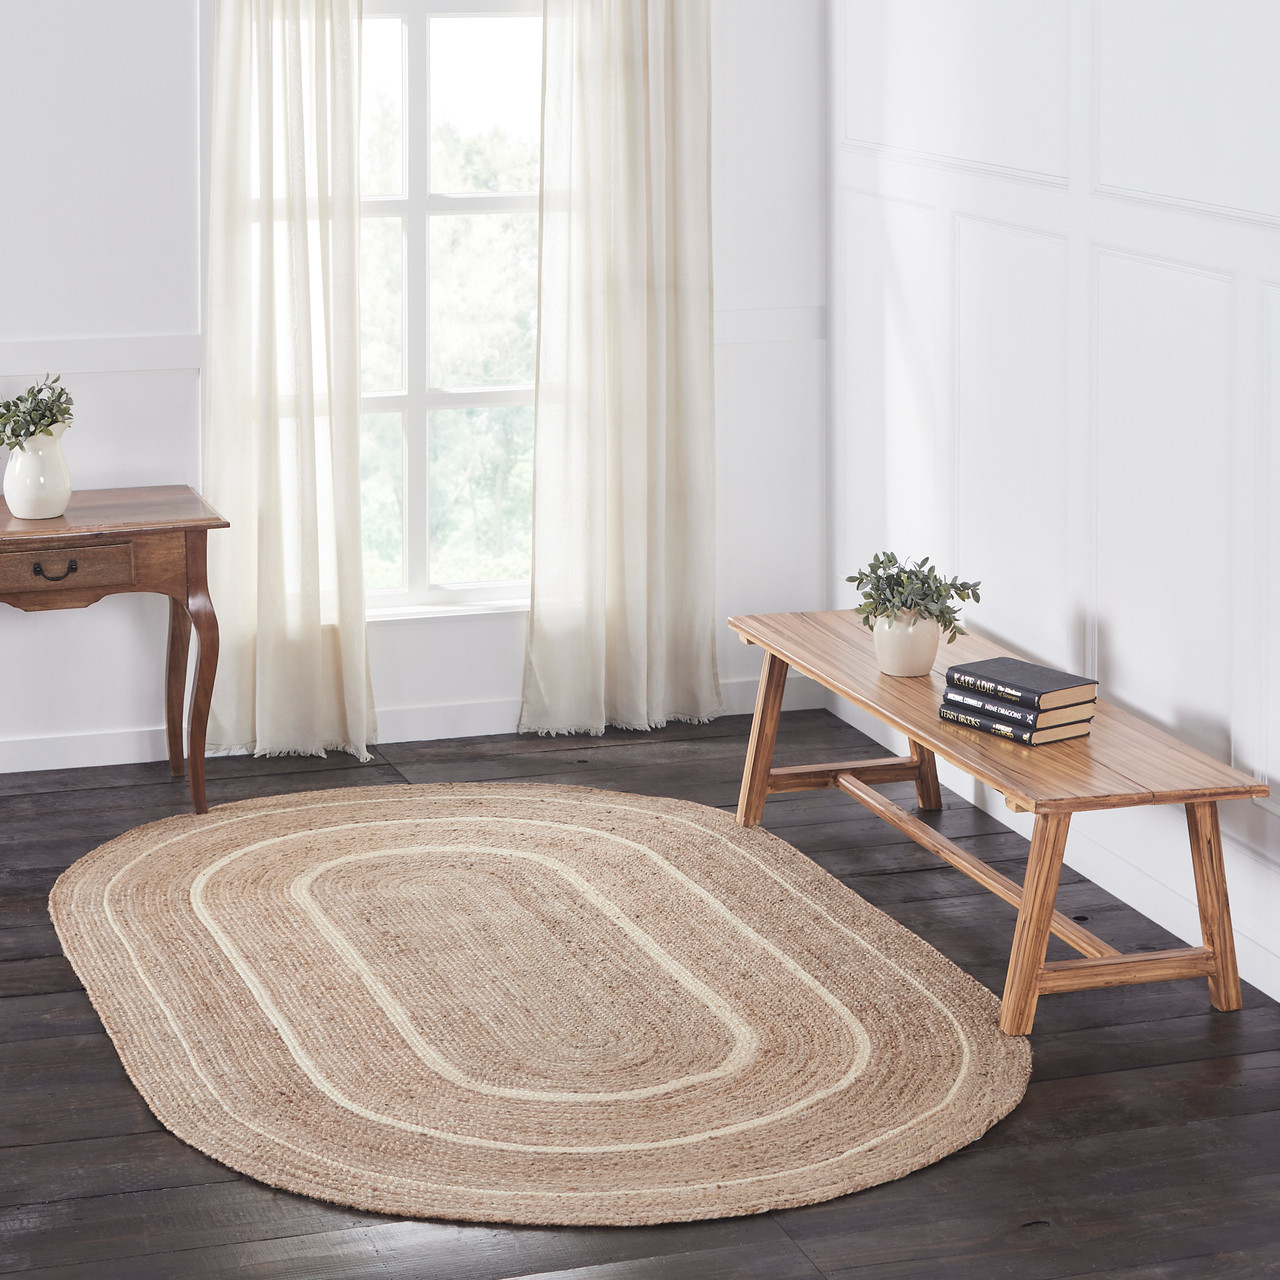 VHC Brands Braided Area Rug - Natural & Creme Jute Rug Oval w/ Pad 60x96